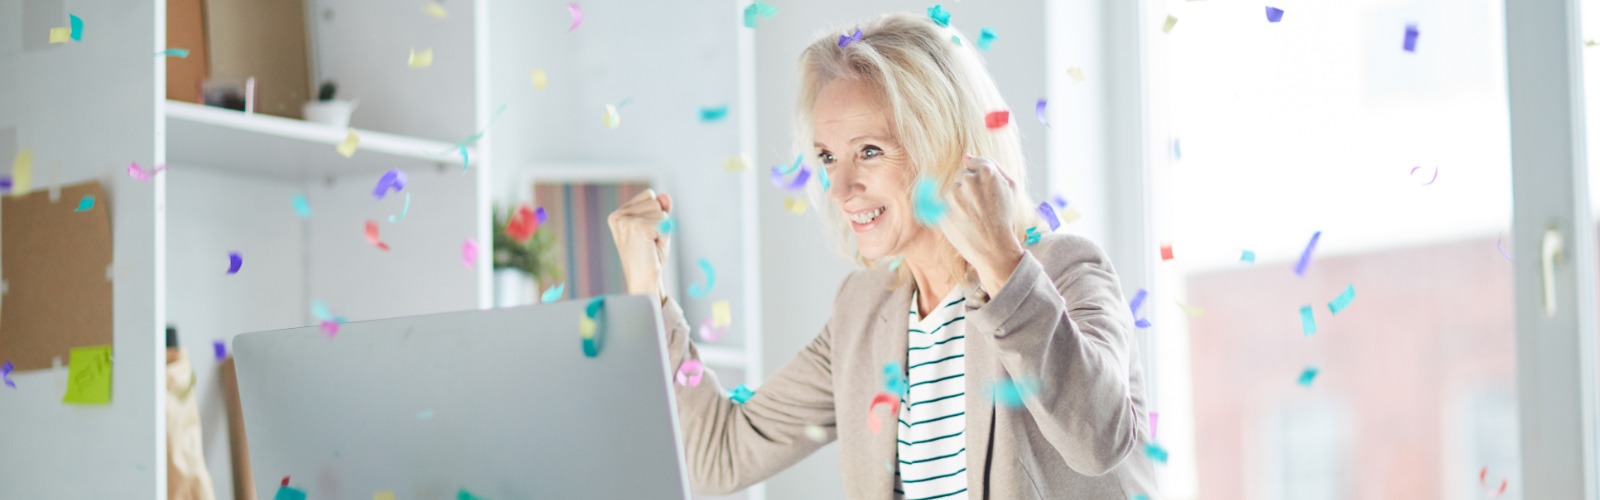 woman at her computer celebrating a lottery win with confetti